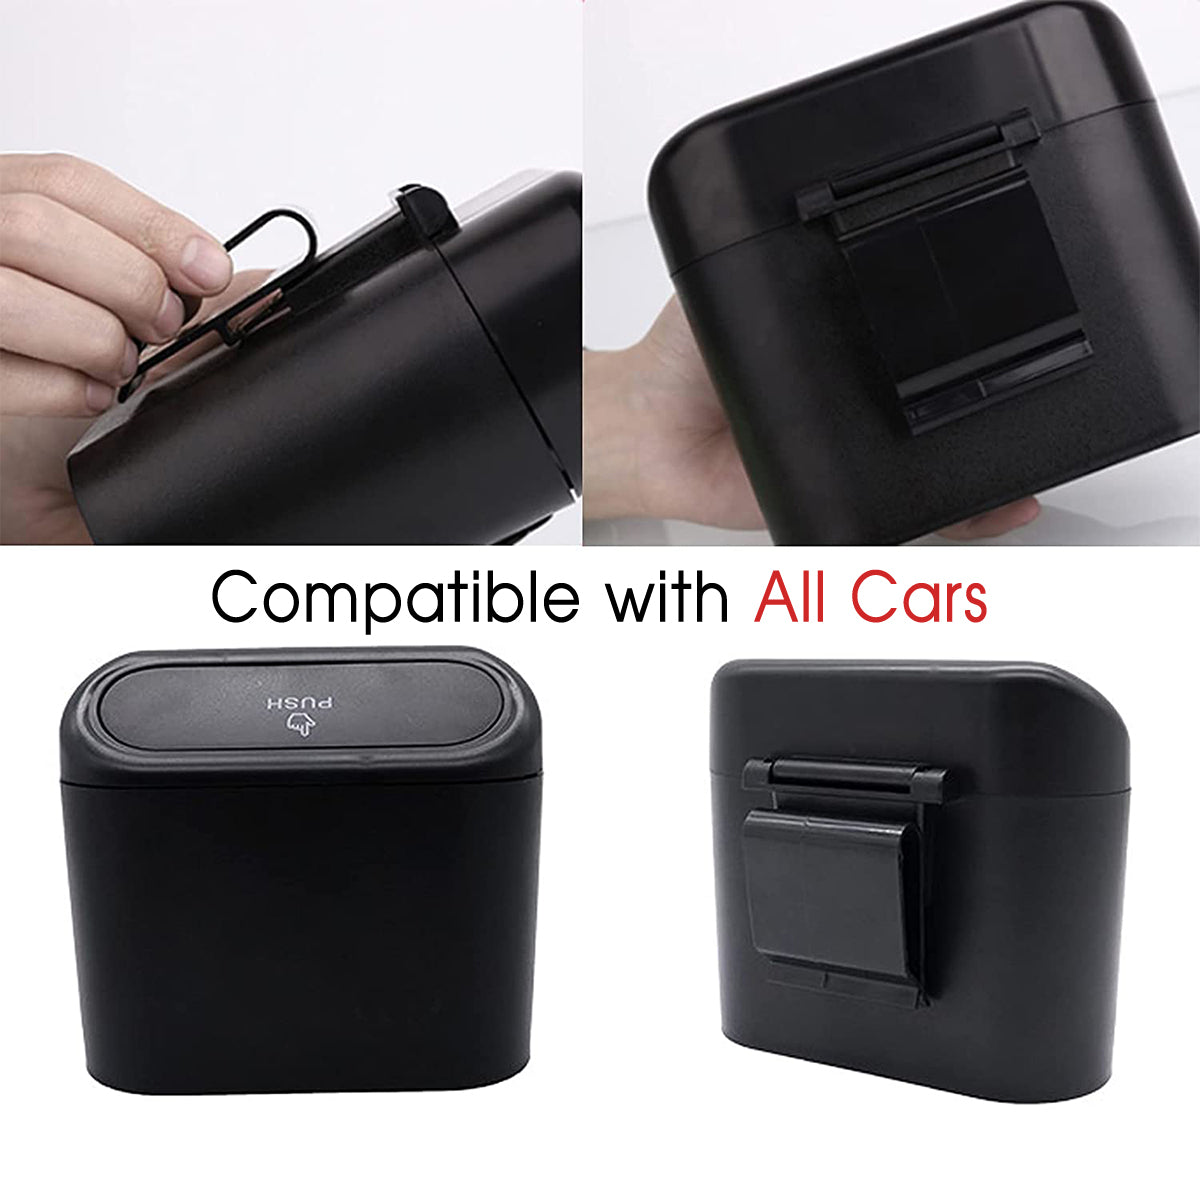 Car Trash Can, Custom For Your Cars, Mini Car Accessories with Lid and Trash Bag, Cute Car Organizer Bin, Small Garbage Can for Storage and Organization, Car Accessories VE11996